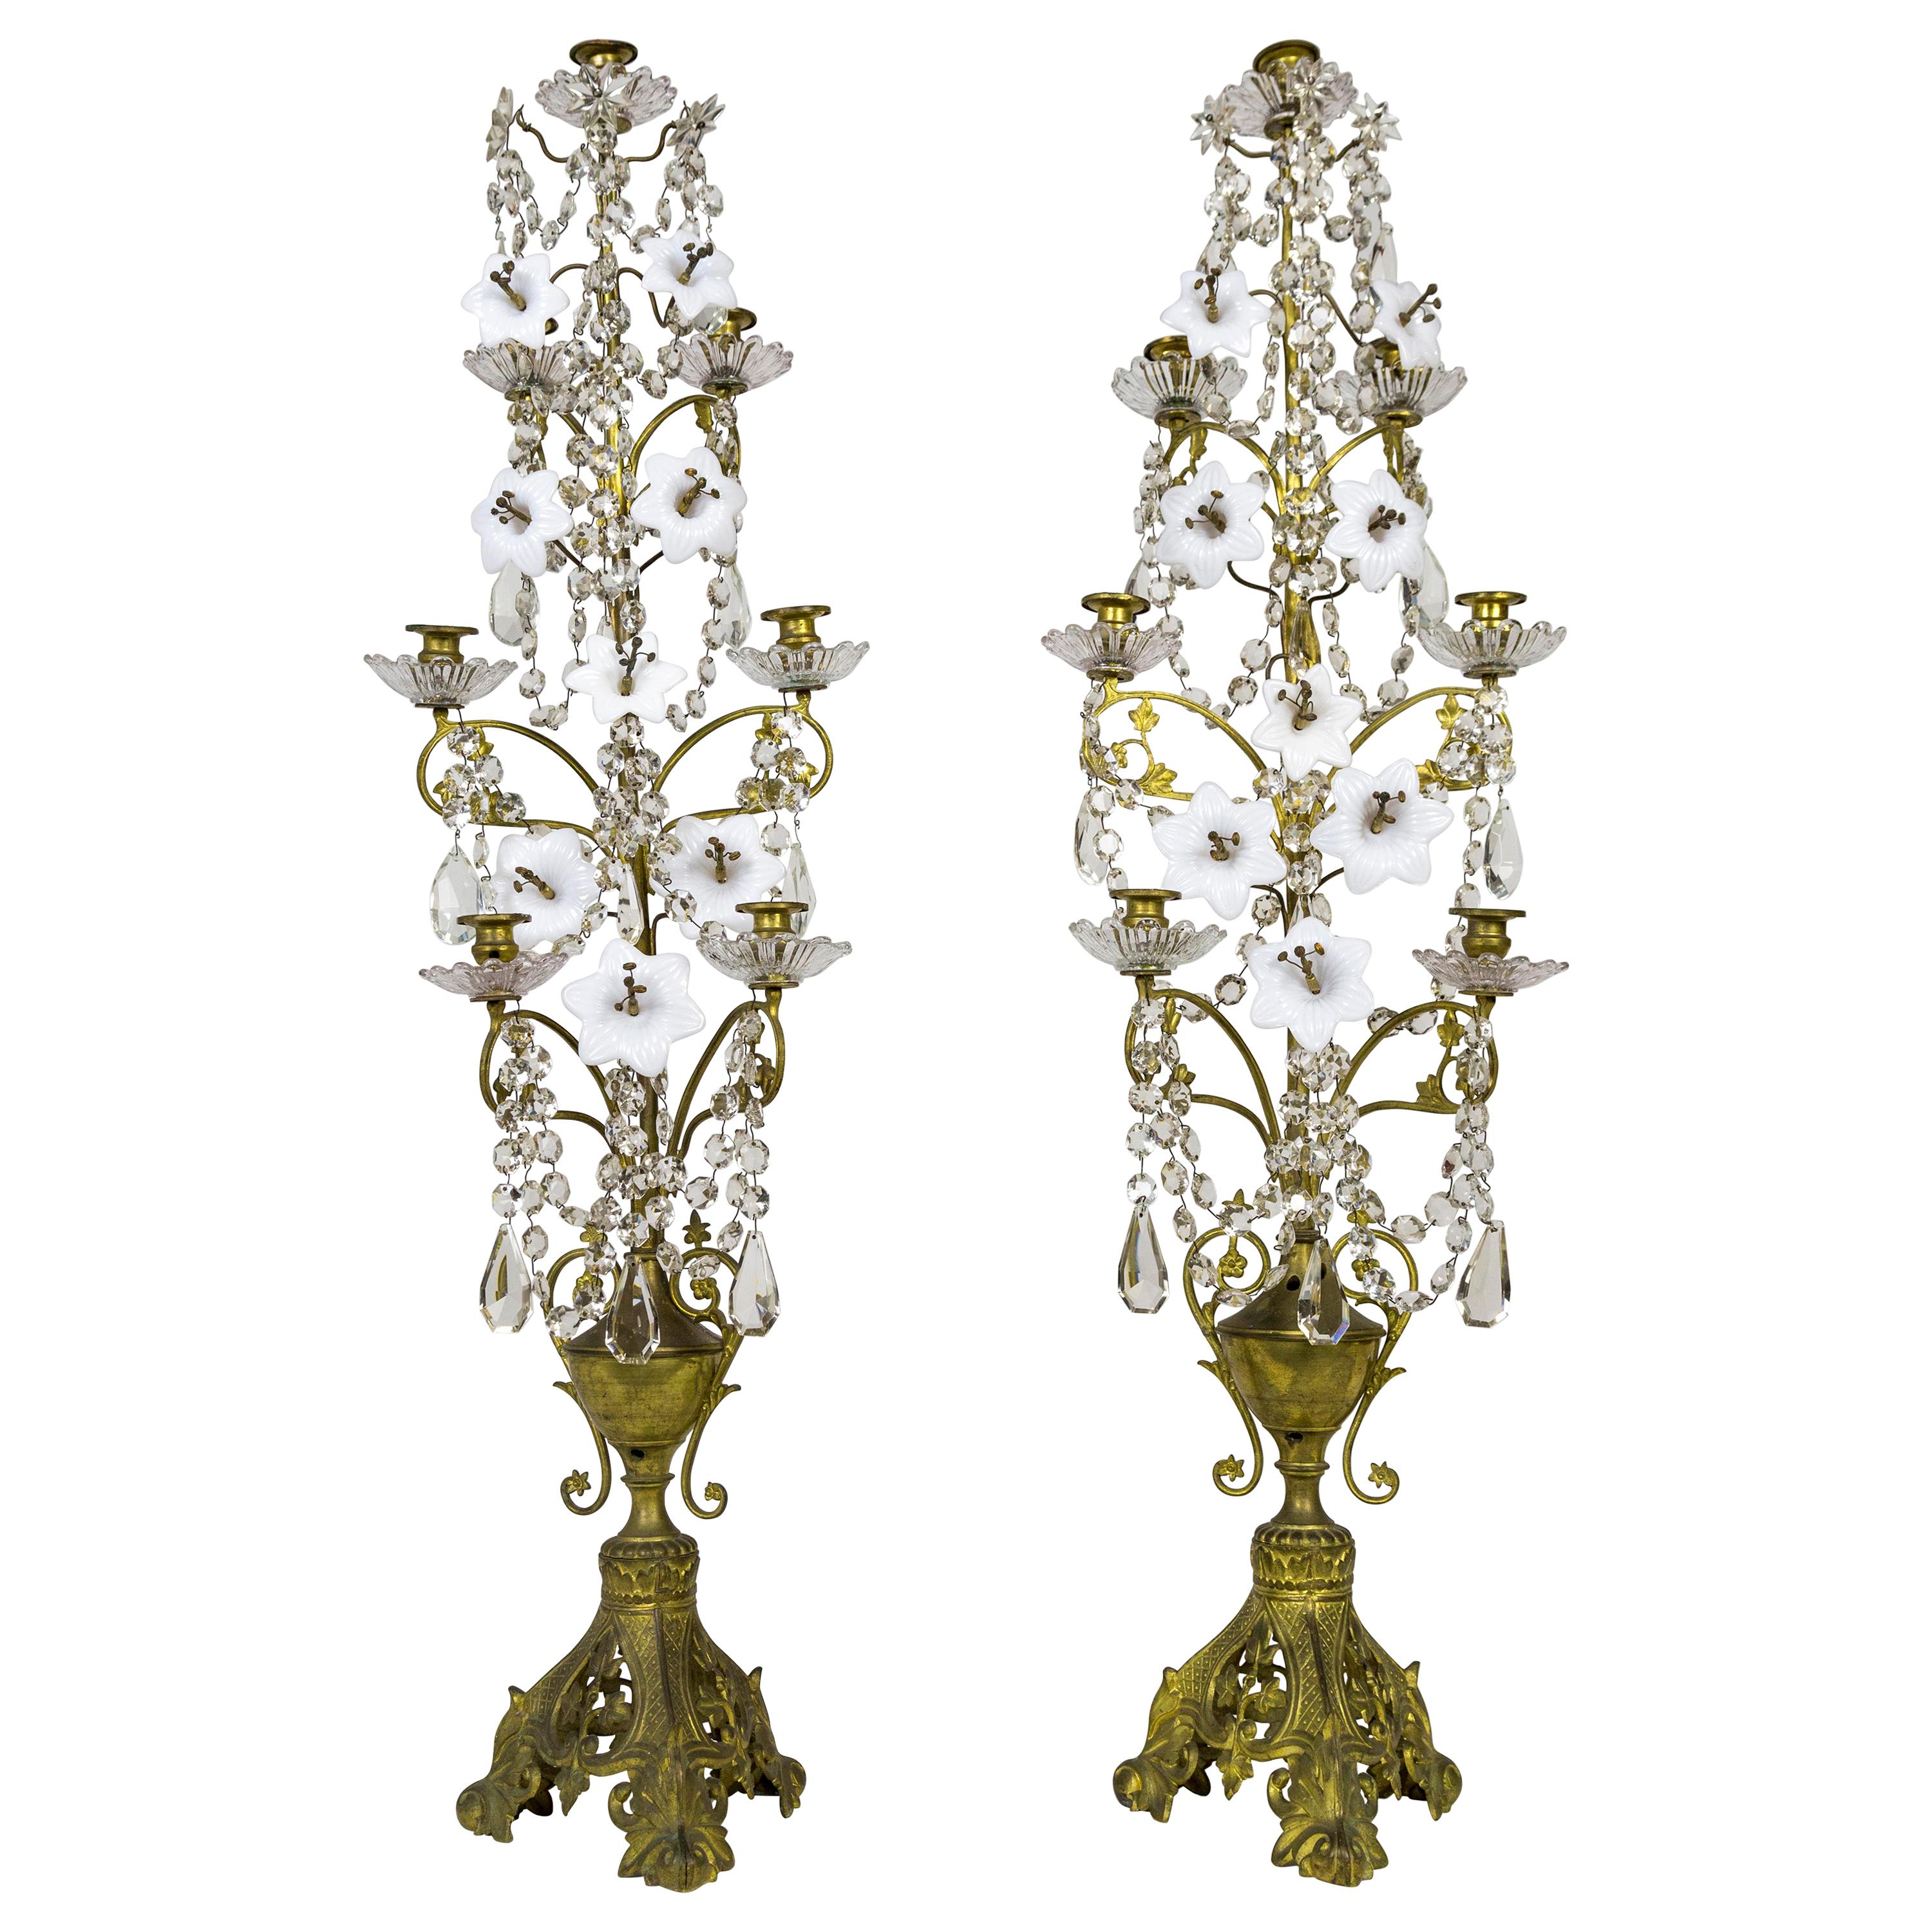 Tall 7-Candle Girandole with Crystals and Milk Glass Flowers, 'Pair'